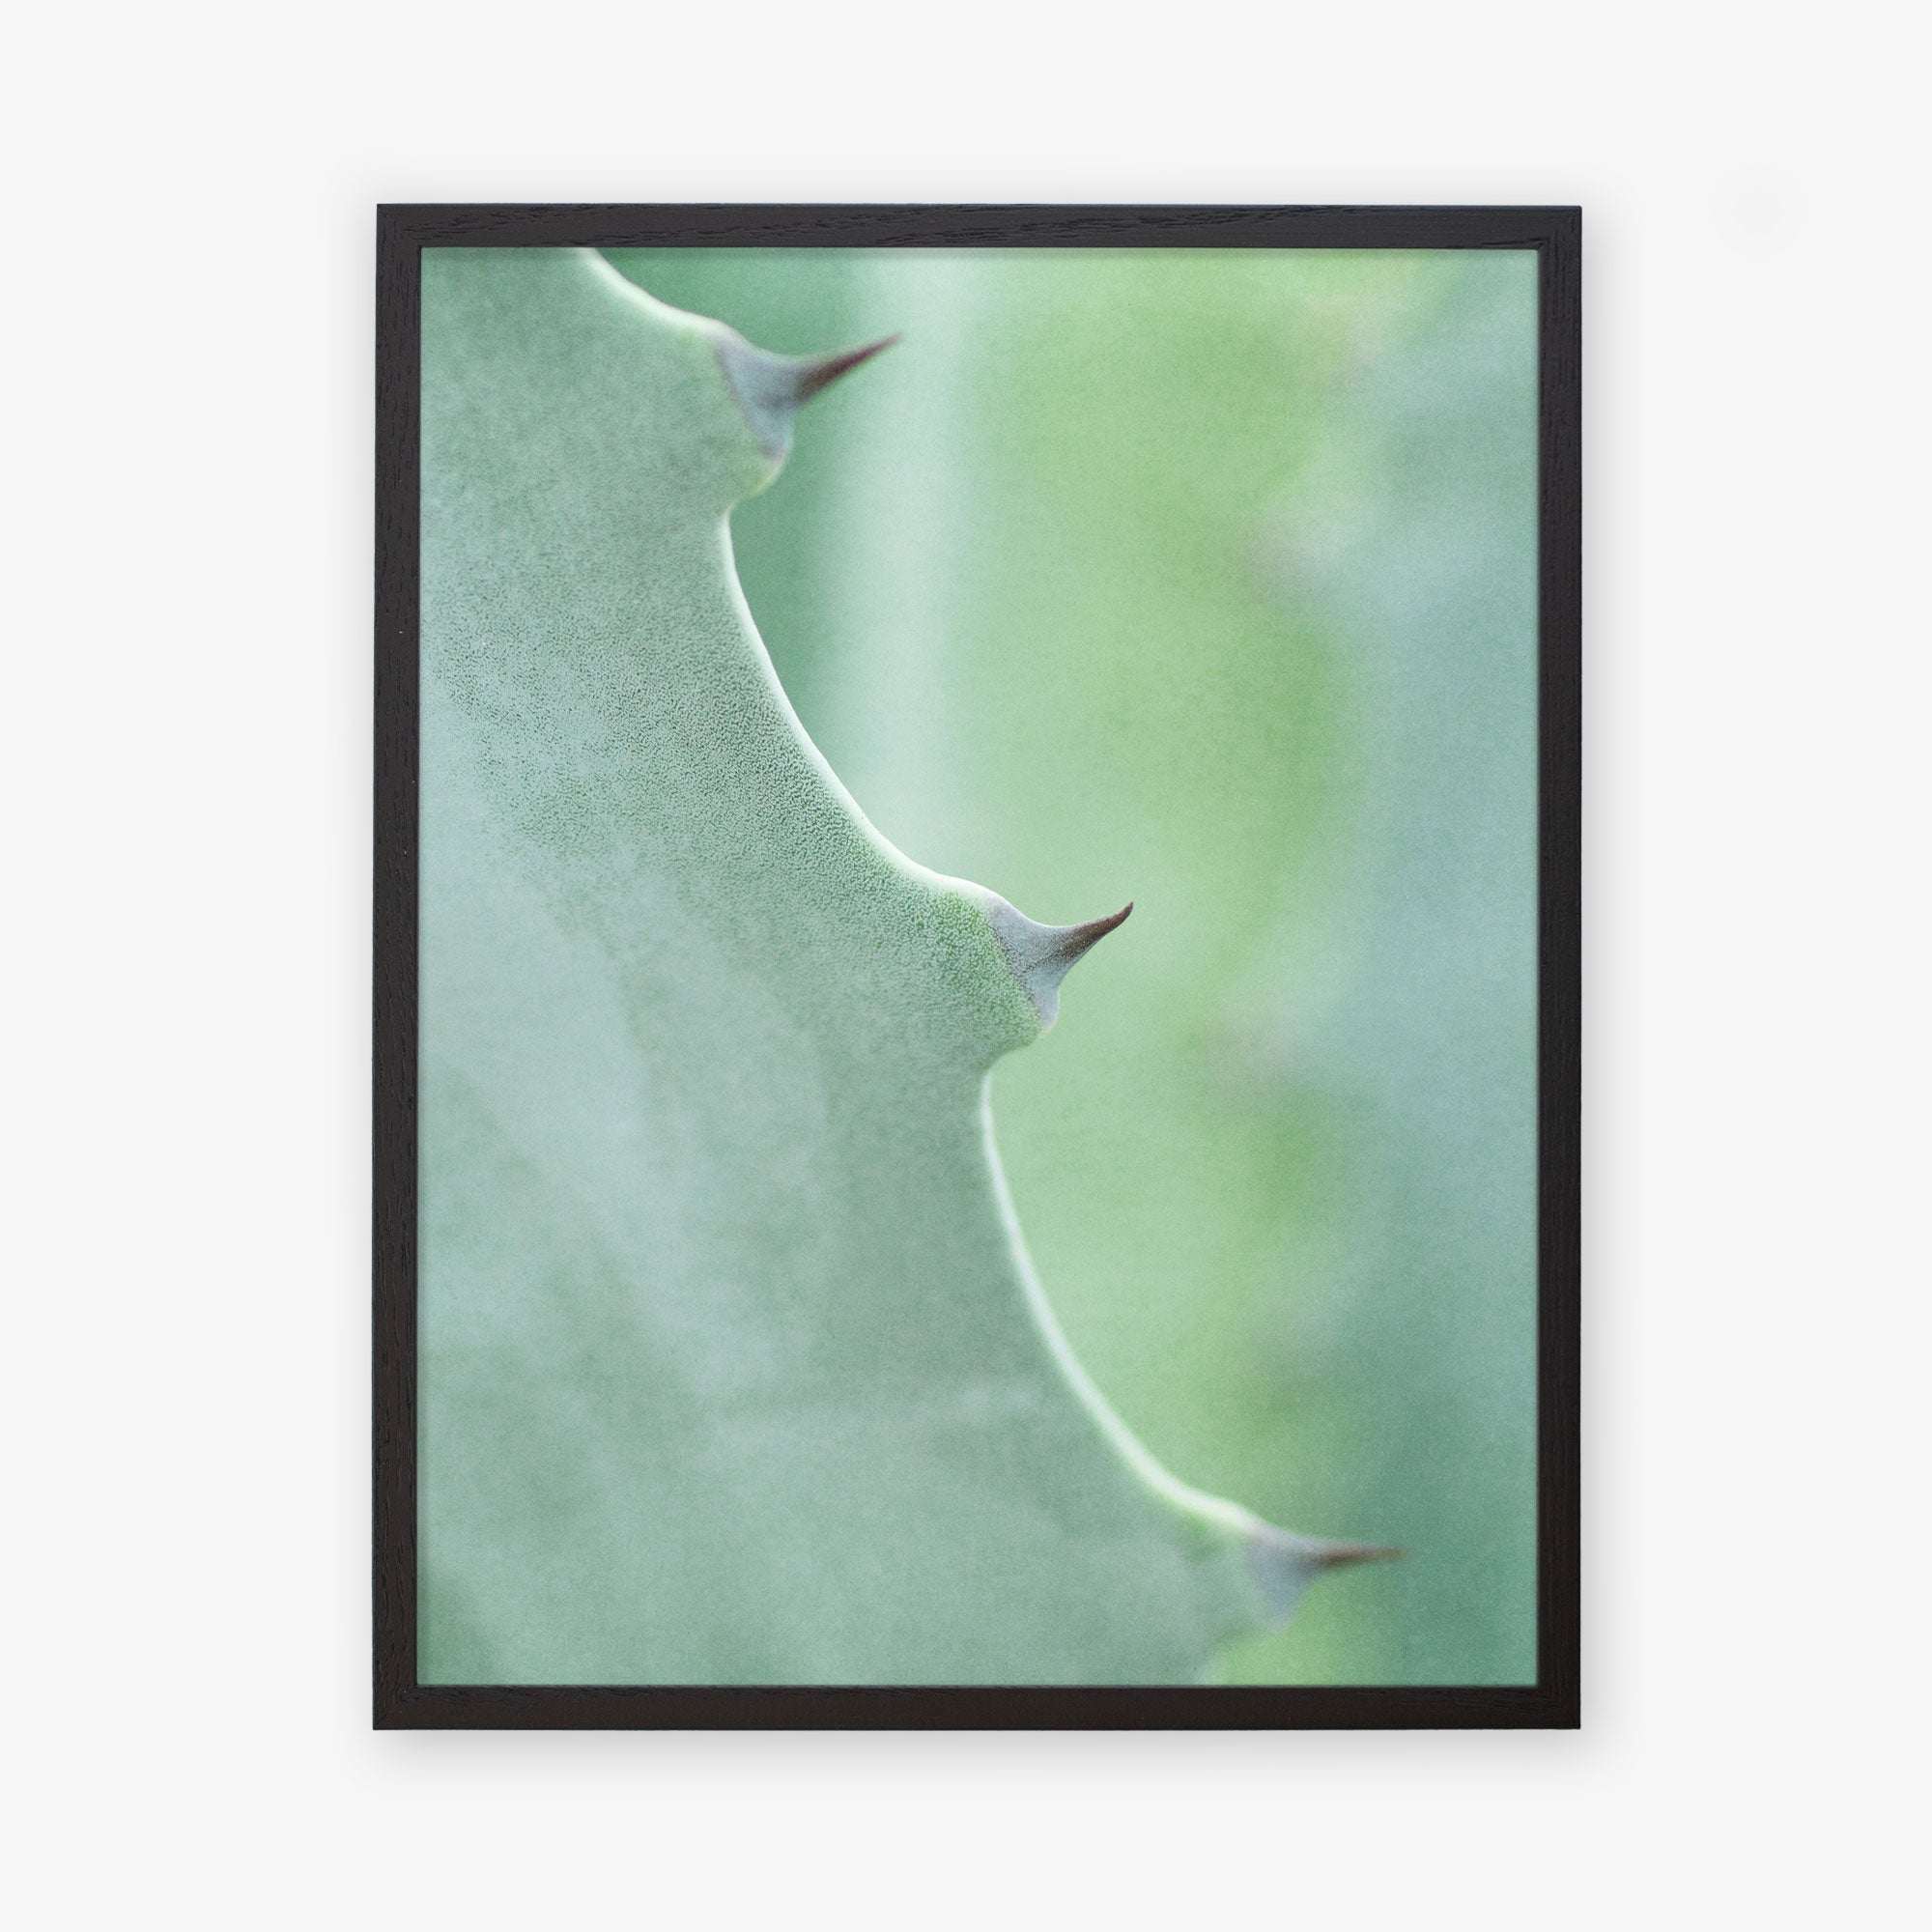 A close-up photograph of an Offley Green &#39;Aloe Vera Spikes II&#39; green botanical print, with sharp thorns along its edge, framed with a simple black border, against a softly blurred background.